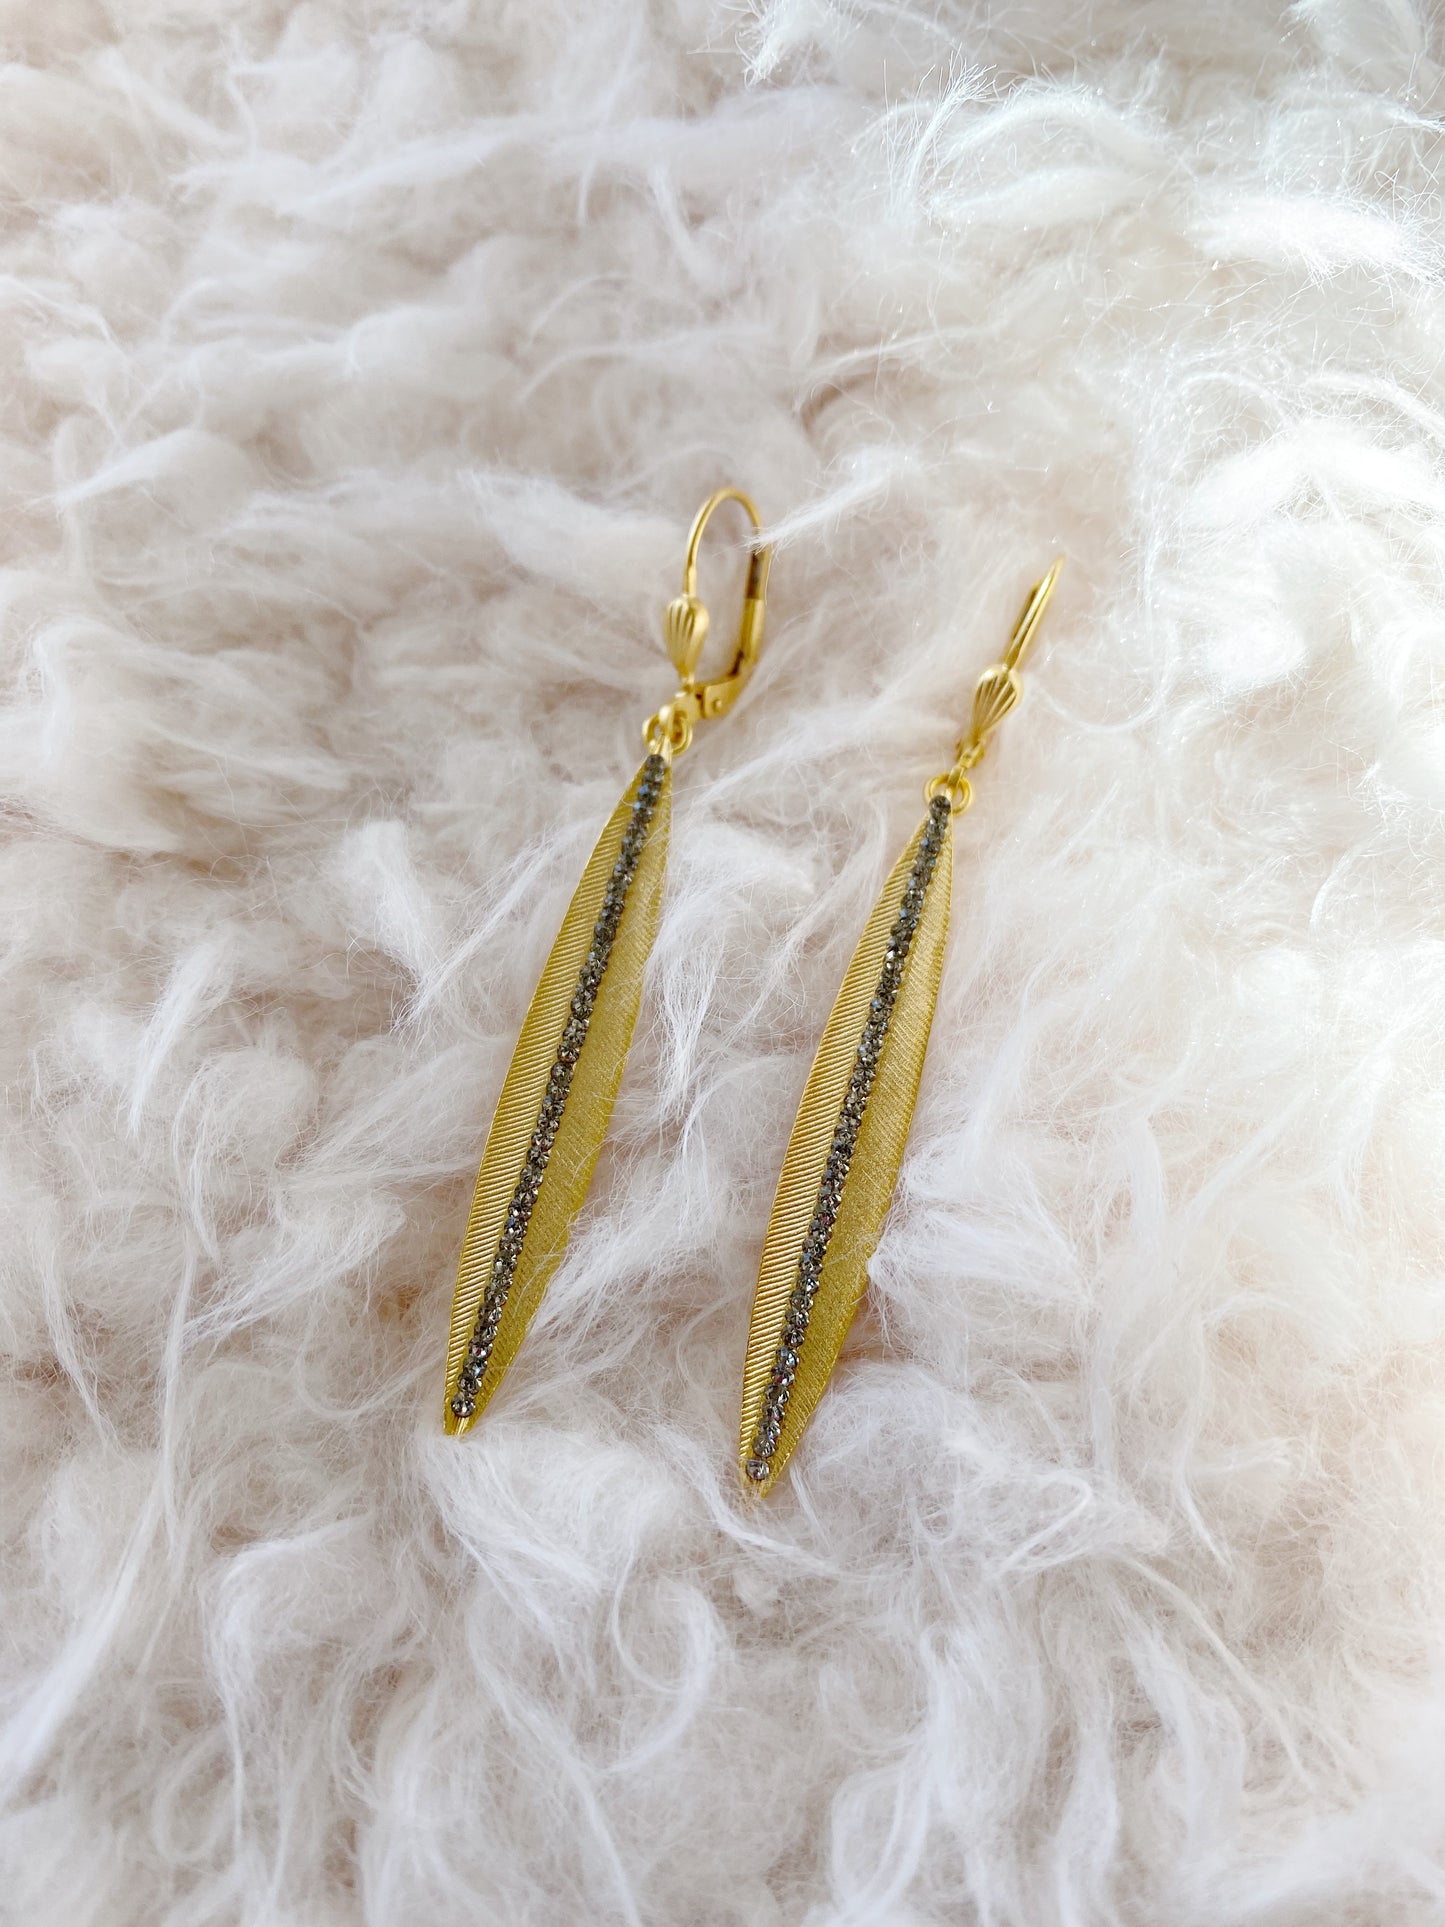 Feather Crystal Earring